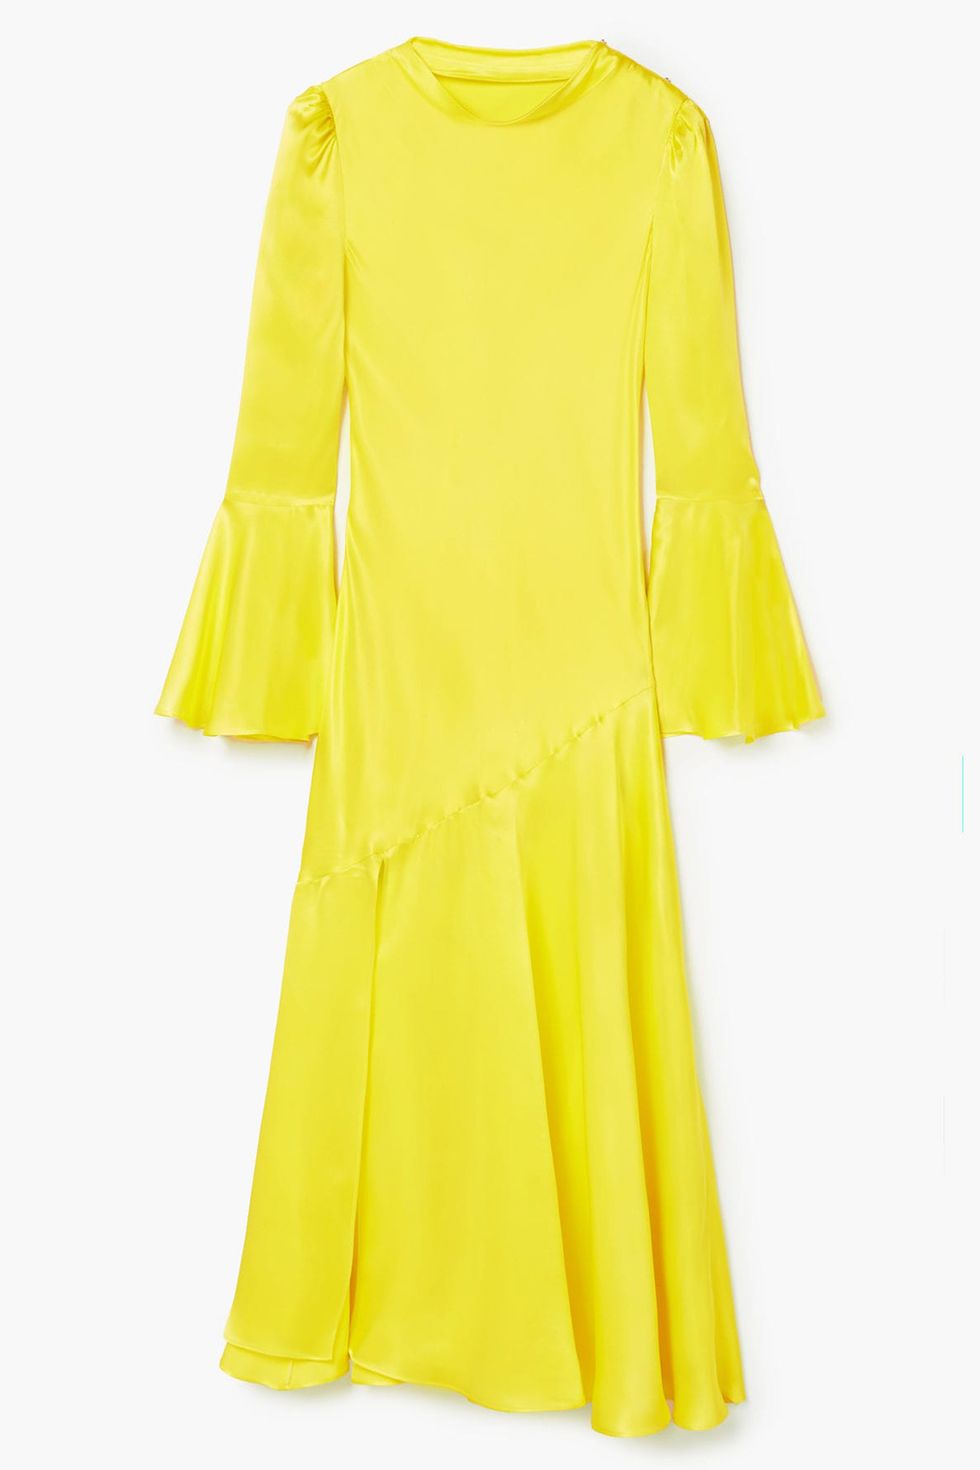 Clothing, Yellow, Sleeve, Dress, Day dress, Outerwear, Neck, Blouse, A-line, 